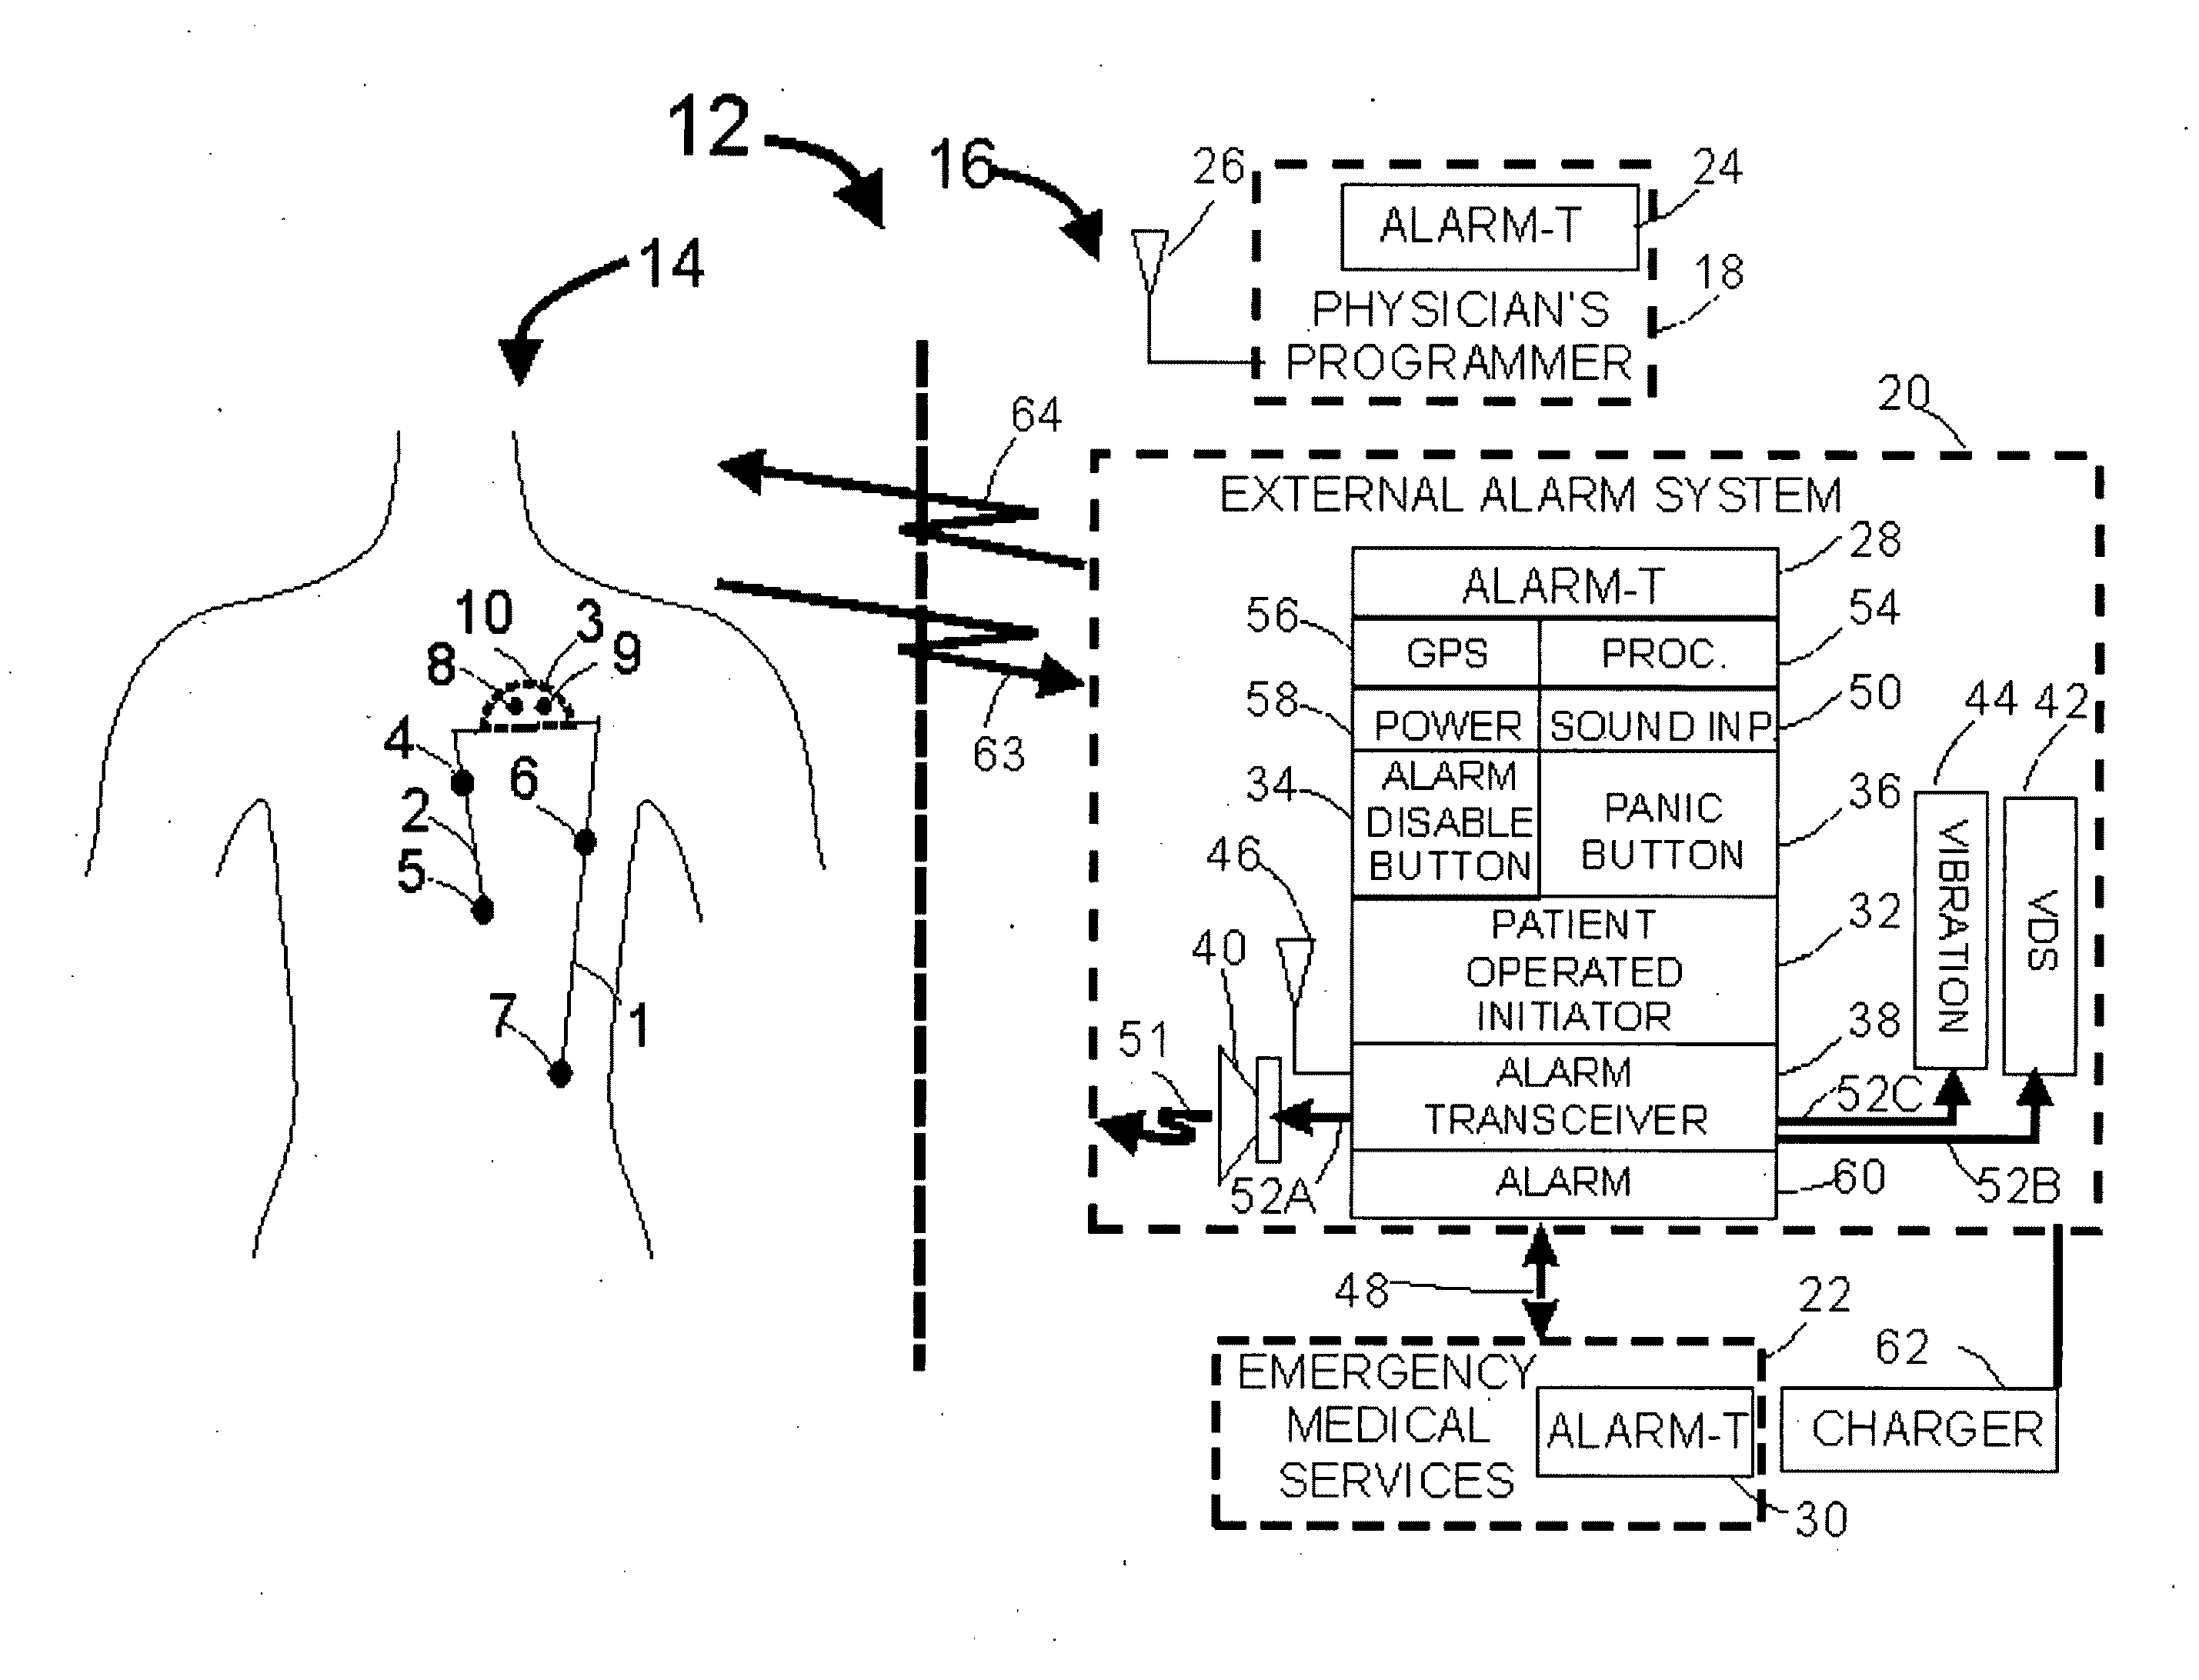 Systems and methods of alarm validation and backup in implanted medical devices